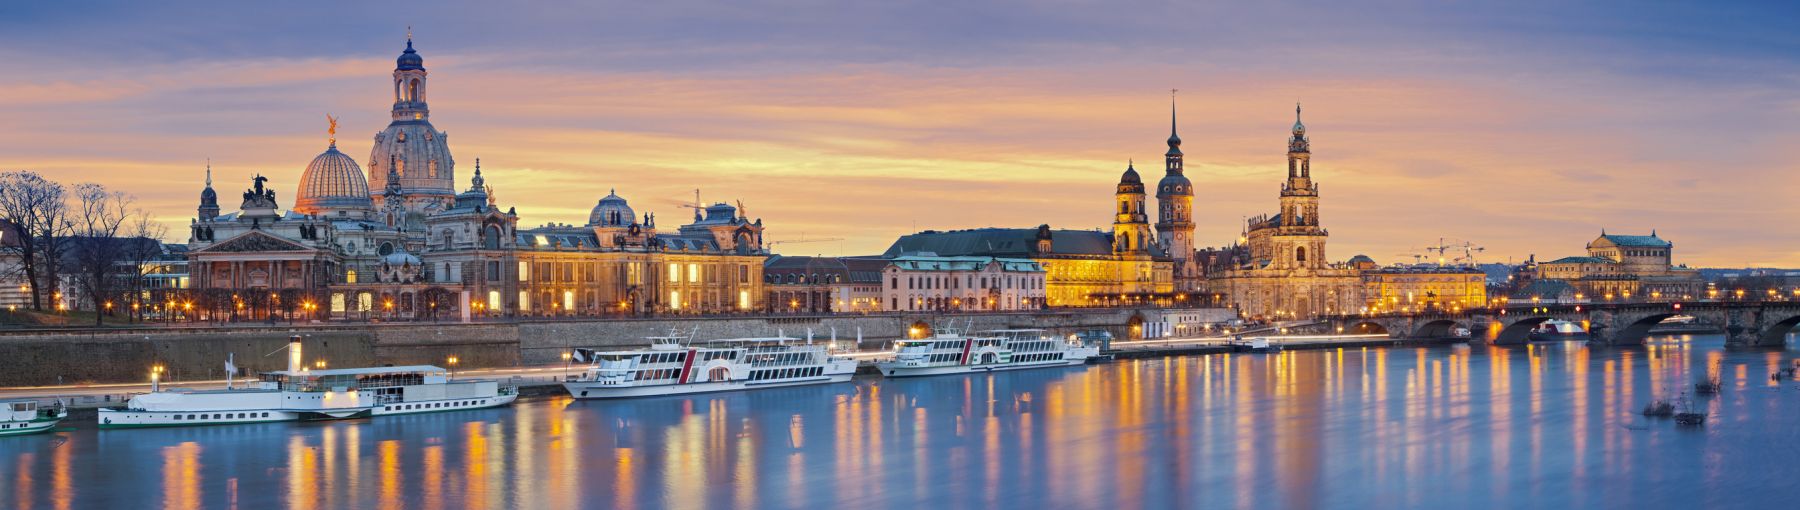 Panoramic image of Dresden, Germany during sunset with Elbe River in the foreground. This is composite of two horizontal images stitched together in photoshop.